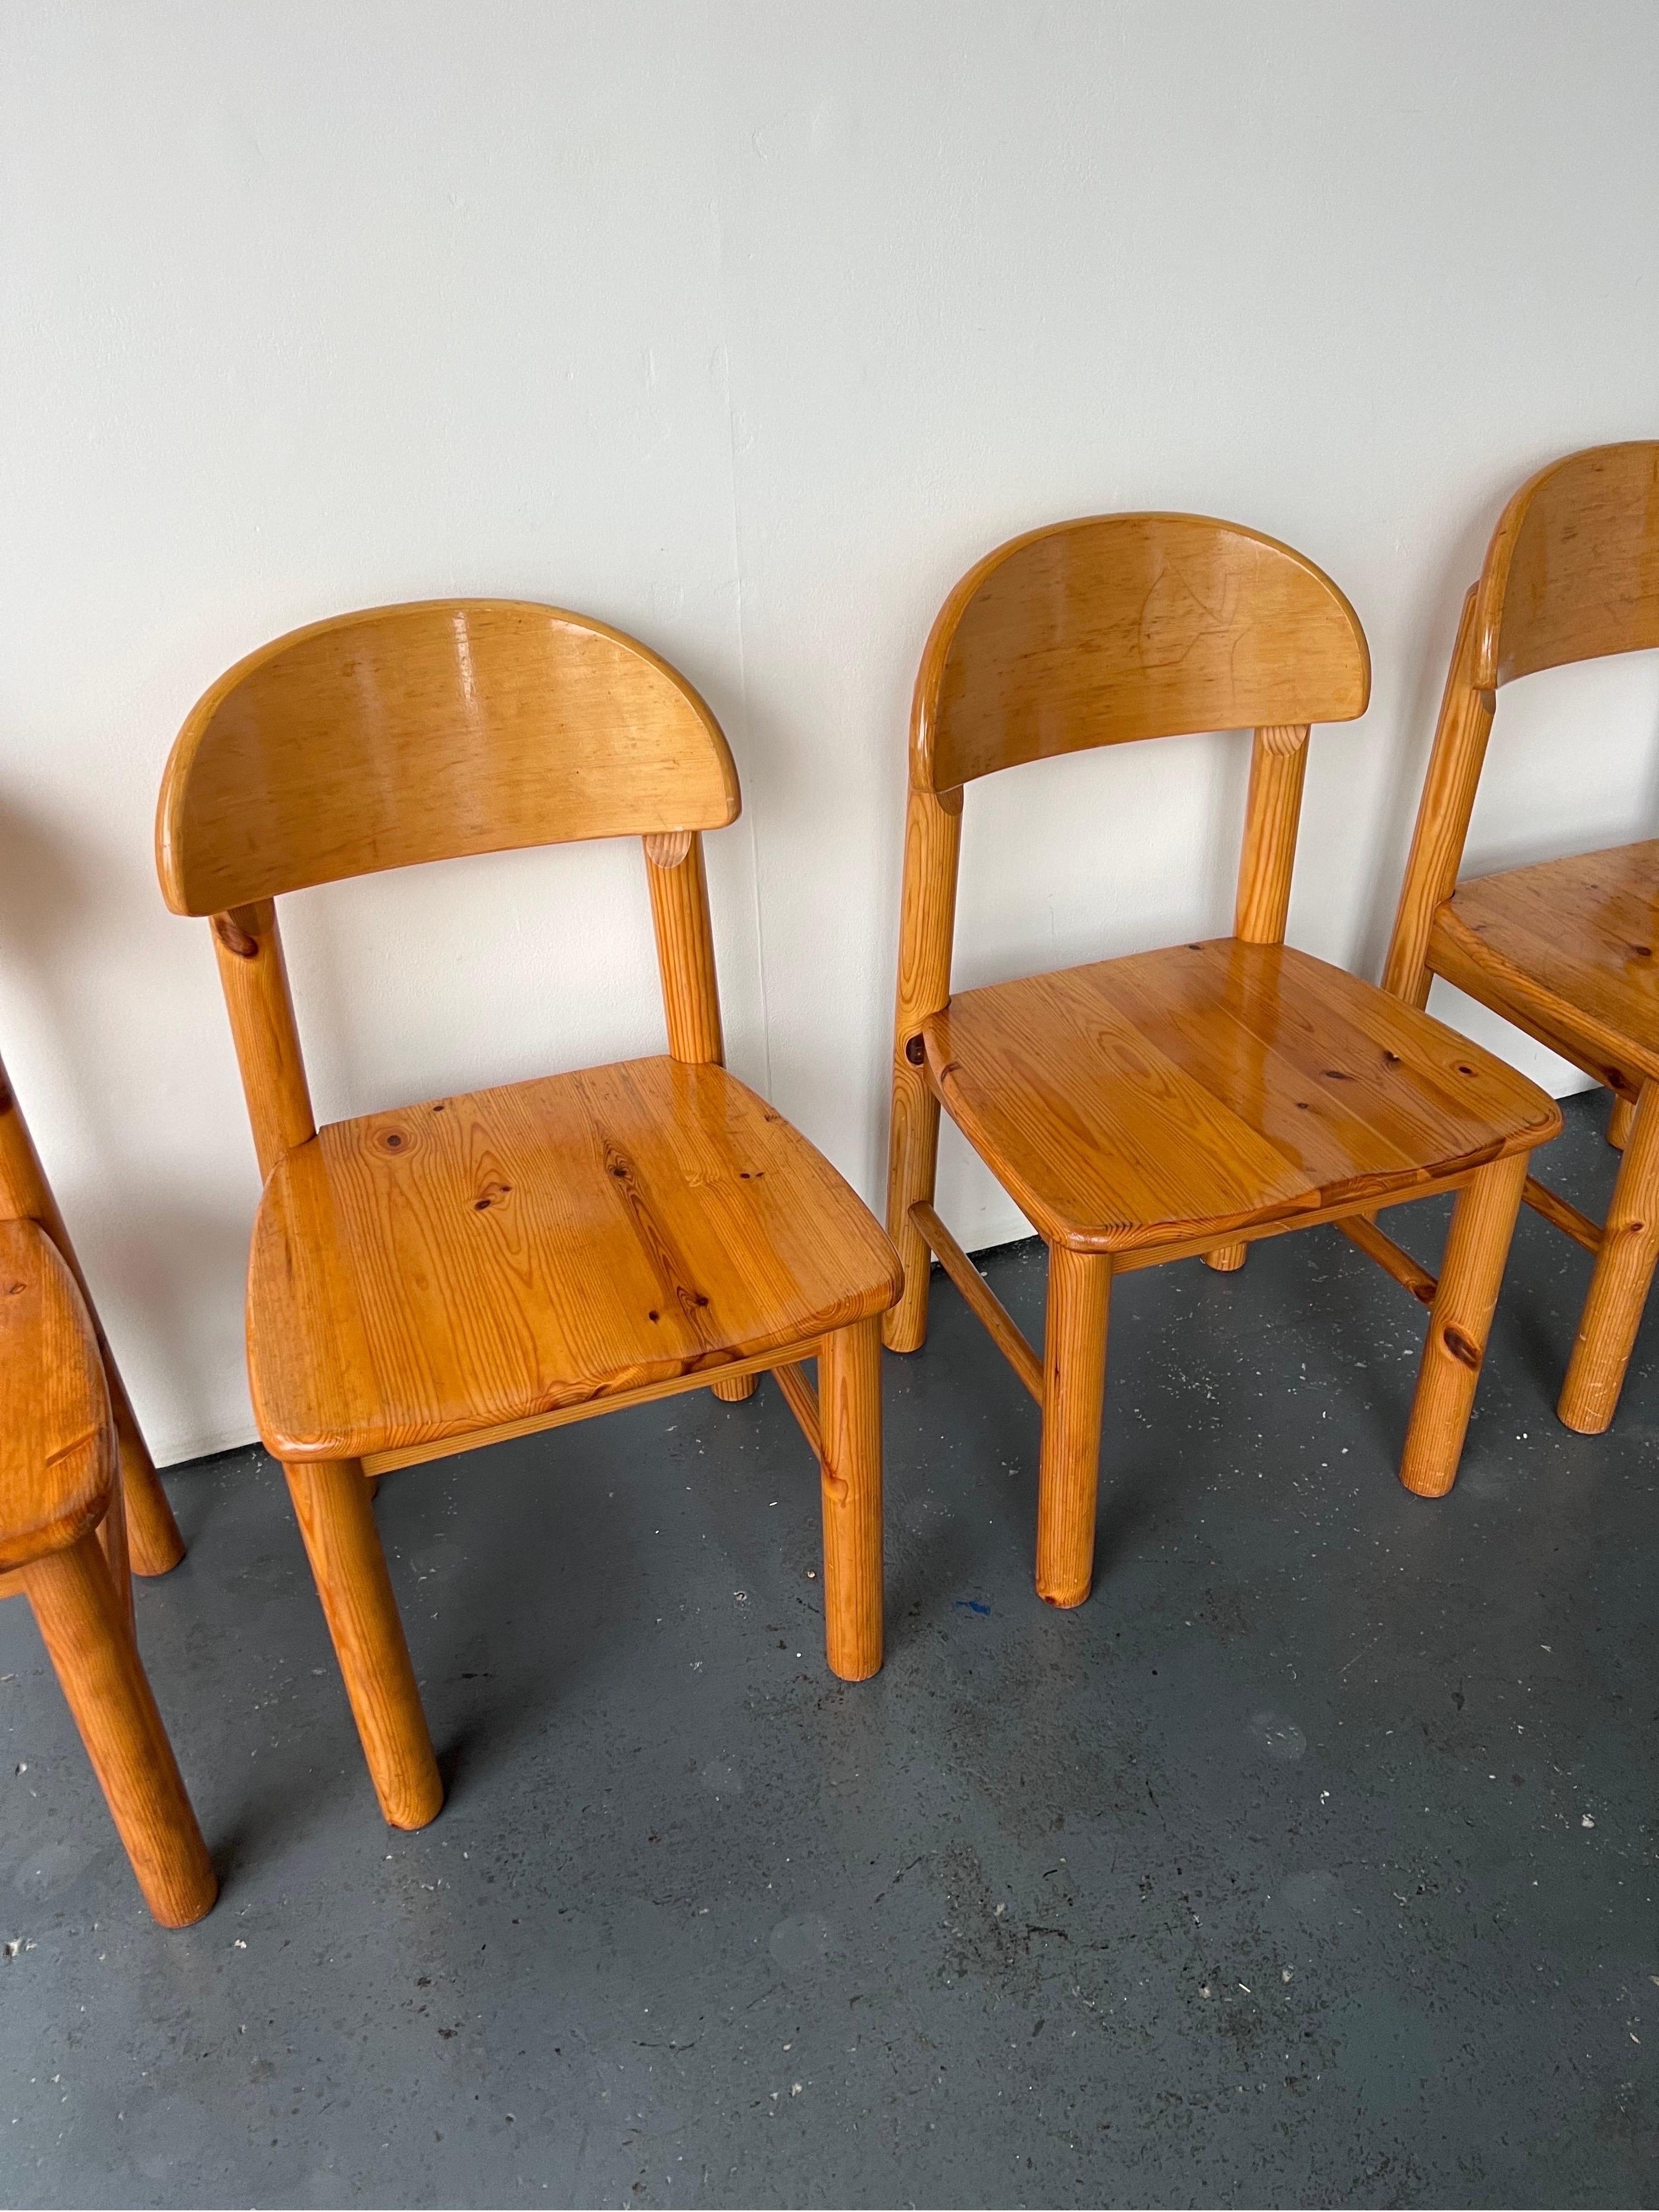 Set of x4 solid pine dining chairs by Danish designer Rainer Daumiller.

This set of 4 polished pine chairs by Rainer Daumiller is an excellent example of a brutalist furniture style.

Produced by Hirtshals Savvaerk Mobler Denmark (Hirtshals